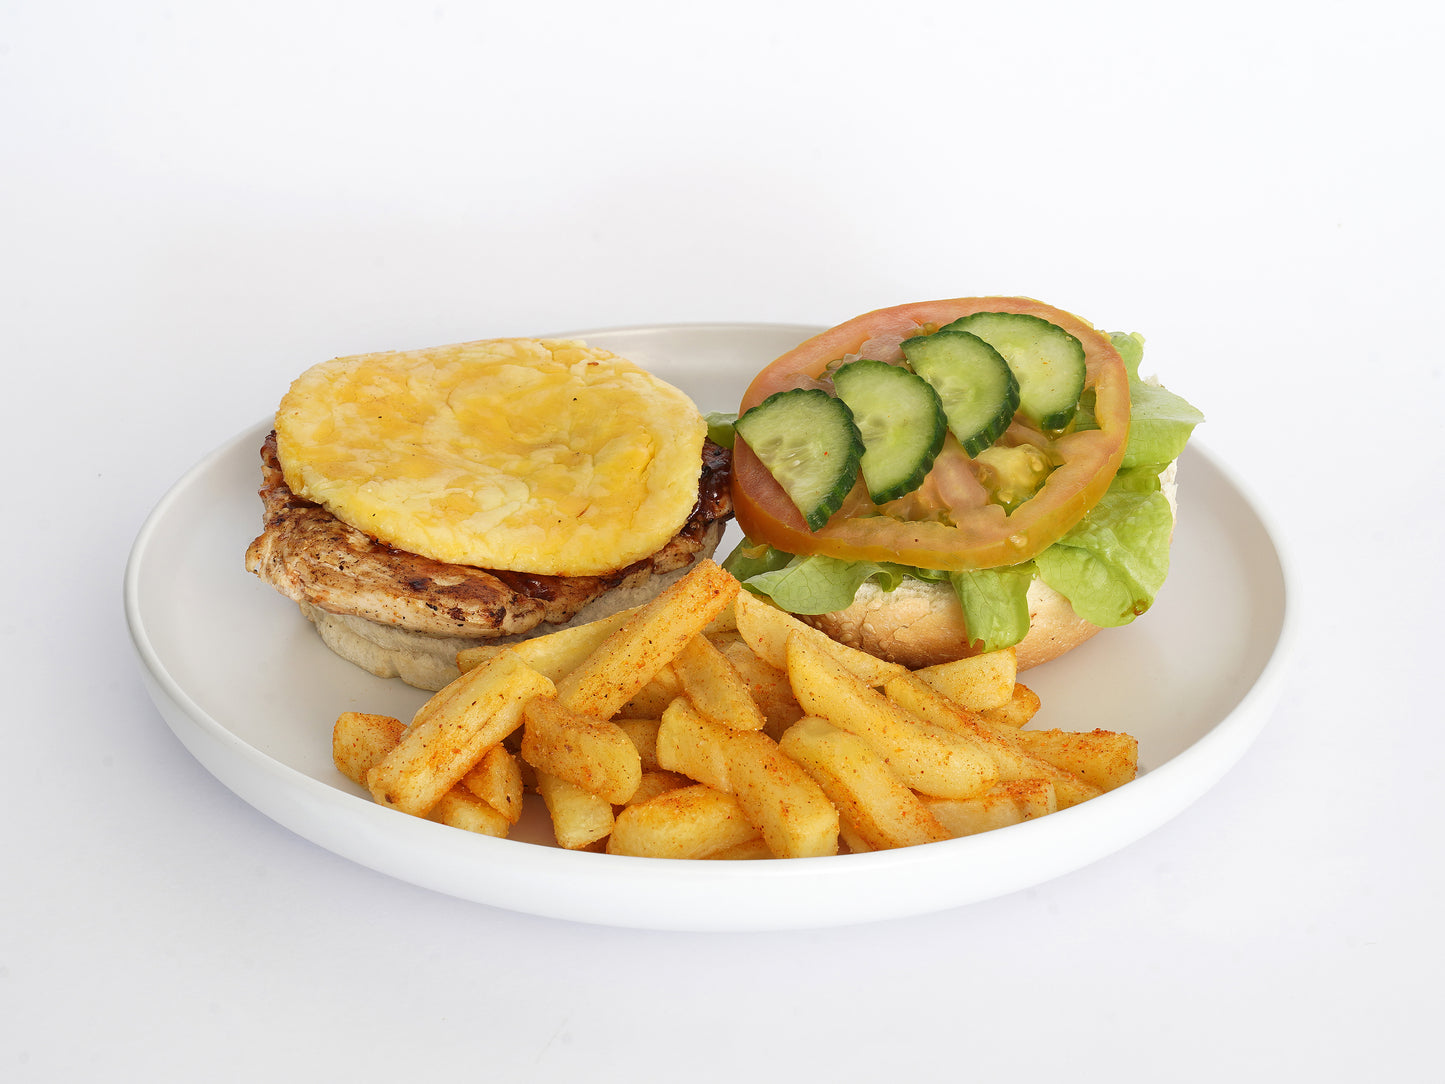 Chicken Burger with Cheese and Chips